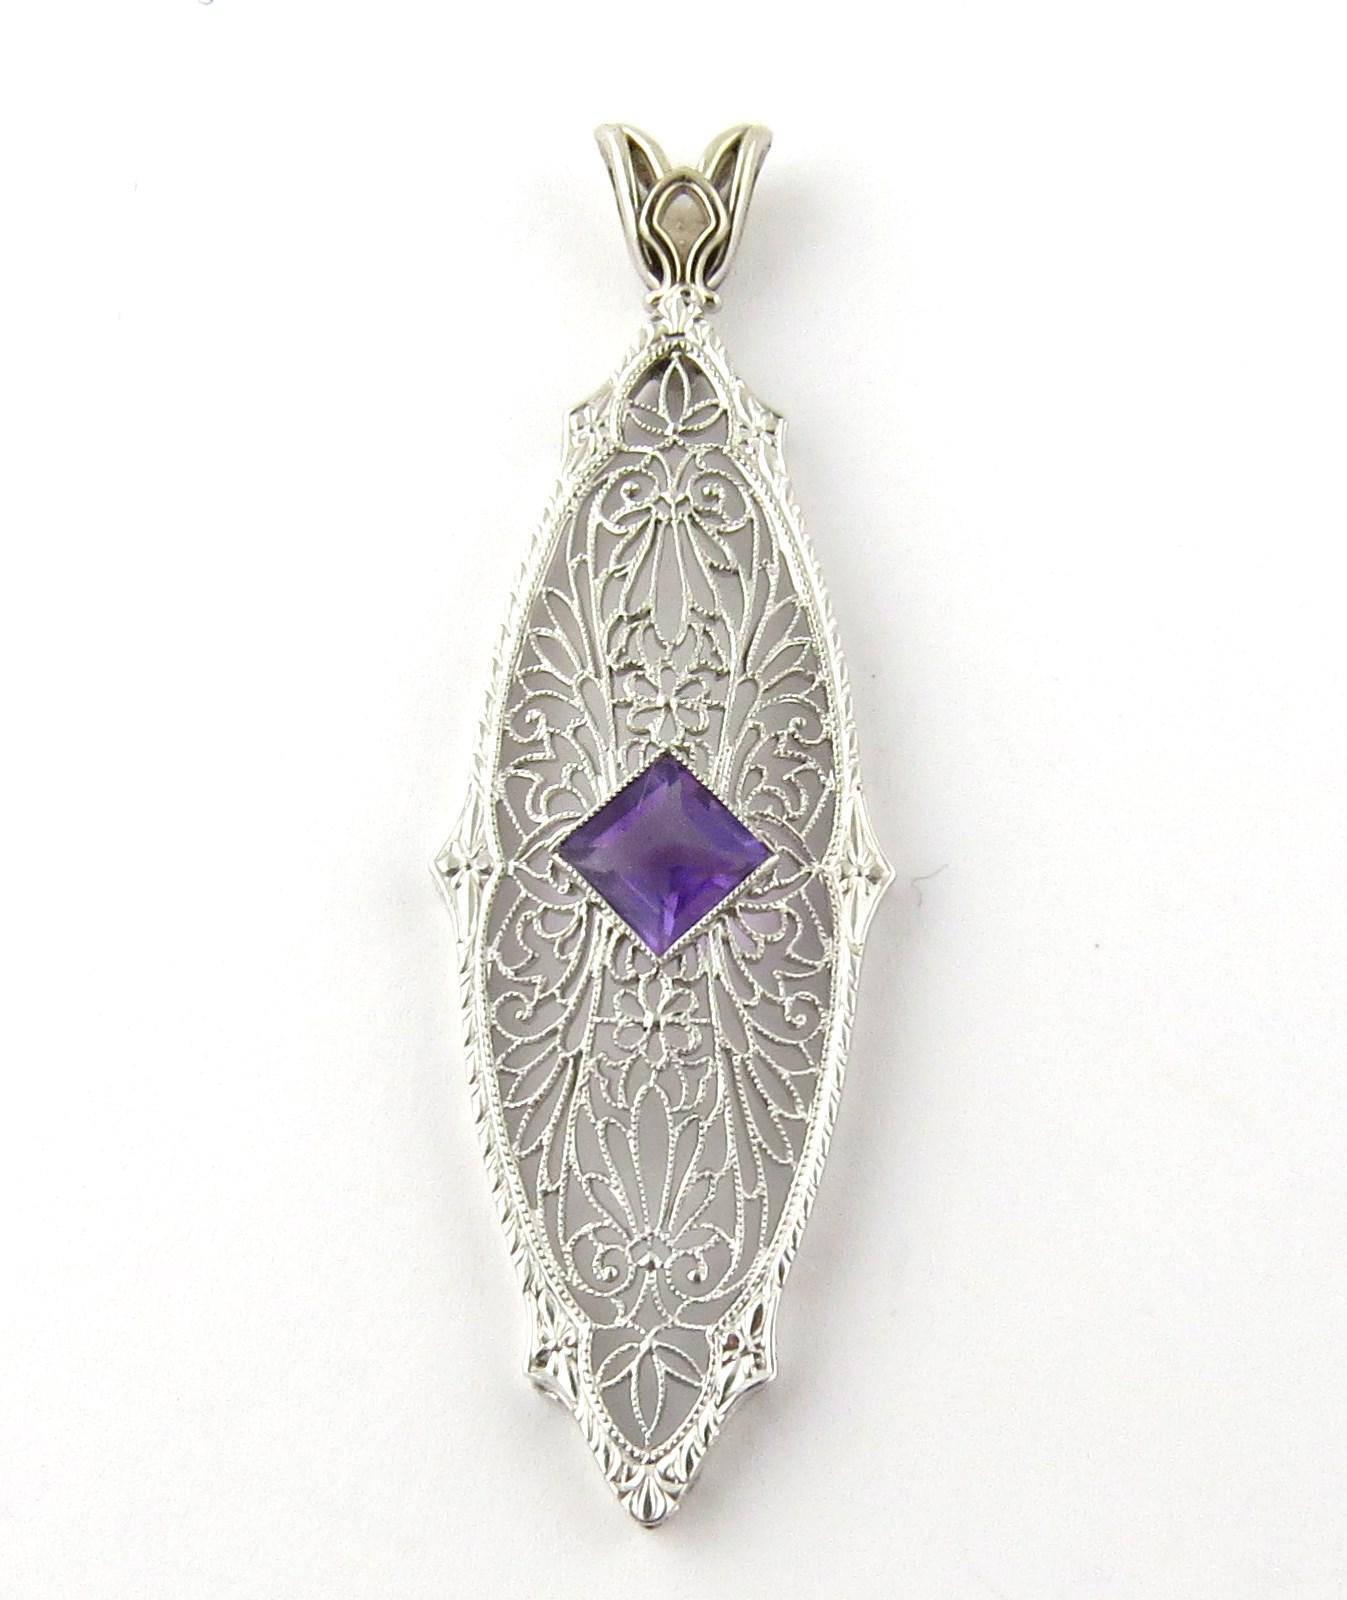 Vintage 14K White Gold Genuine Amethyst Filigree Pendant

This pendant is milgrain set with a square amethyst approx. 5mm in diameter.
Amethyst is a beautiful bright purple.

Princess cut amethyst .54 cts
Color: purple
Clarity: AAA

Pendant hangs 2